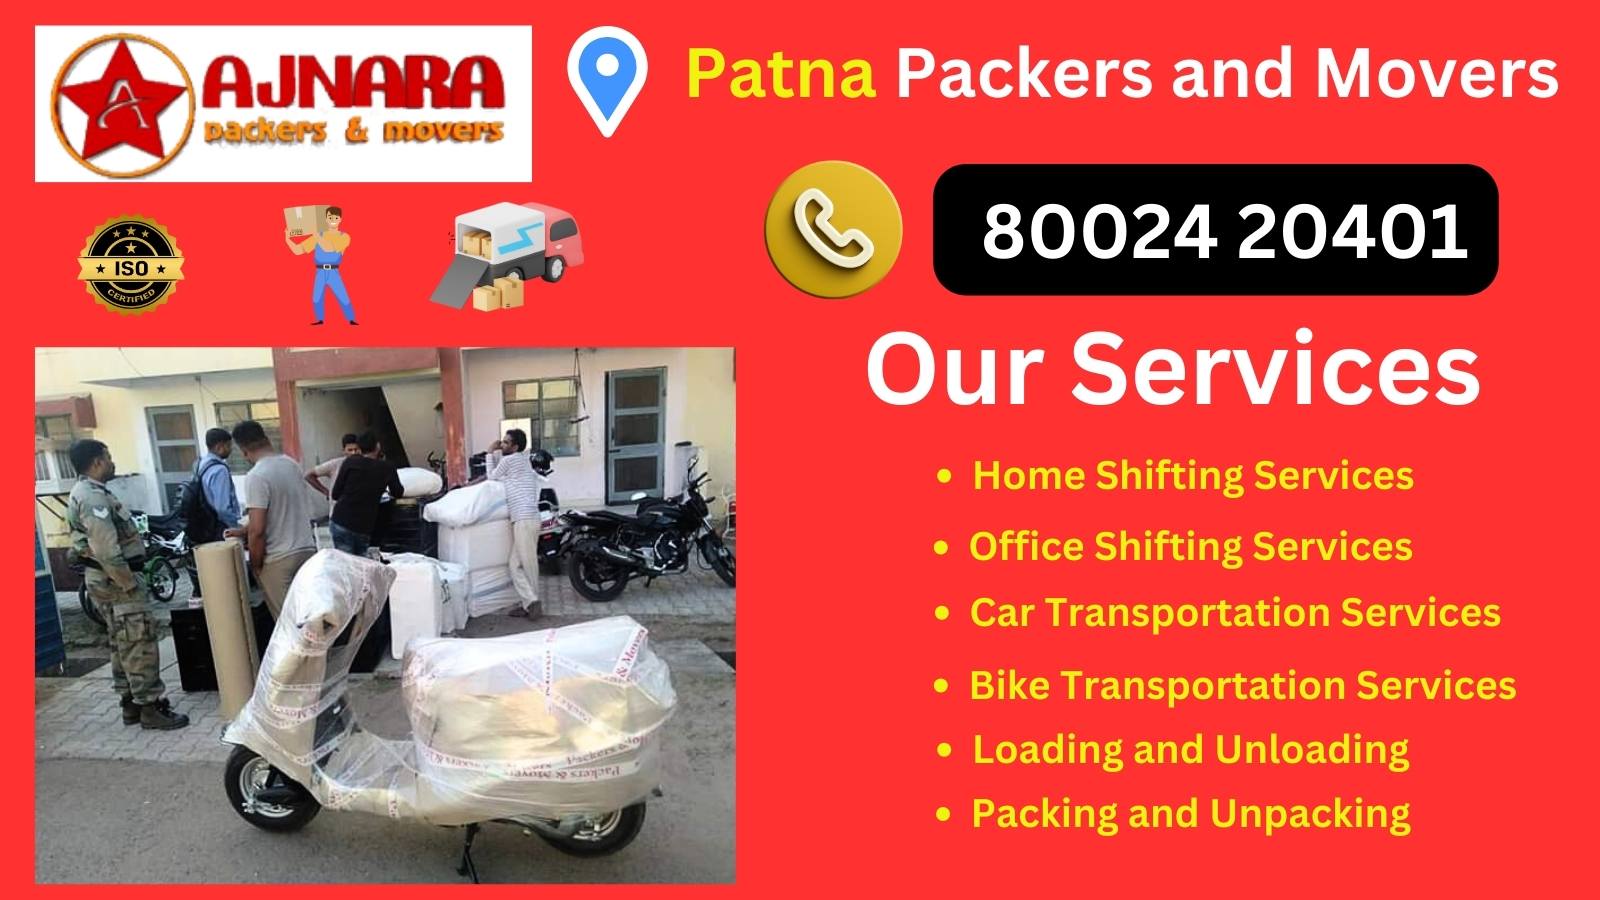 Packers and Movers in Ptana